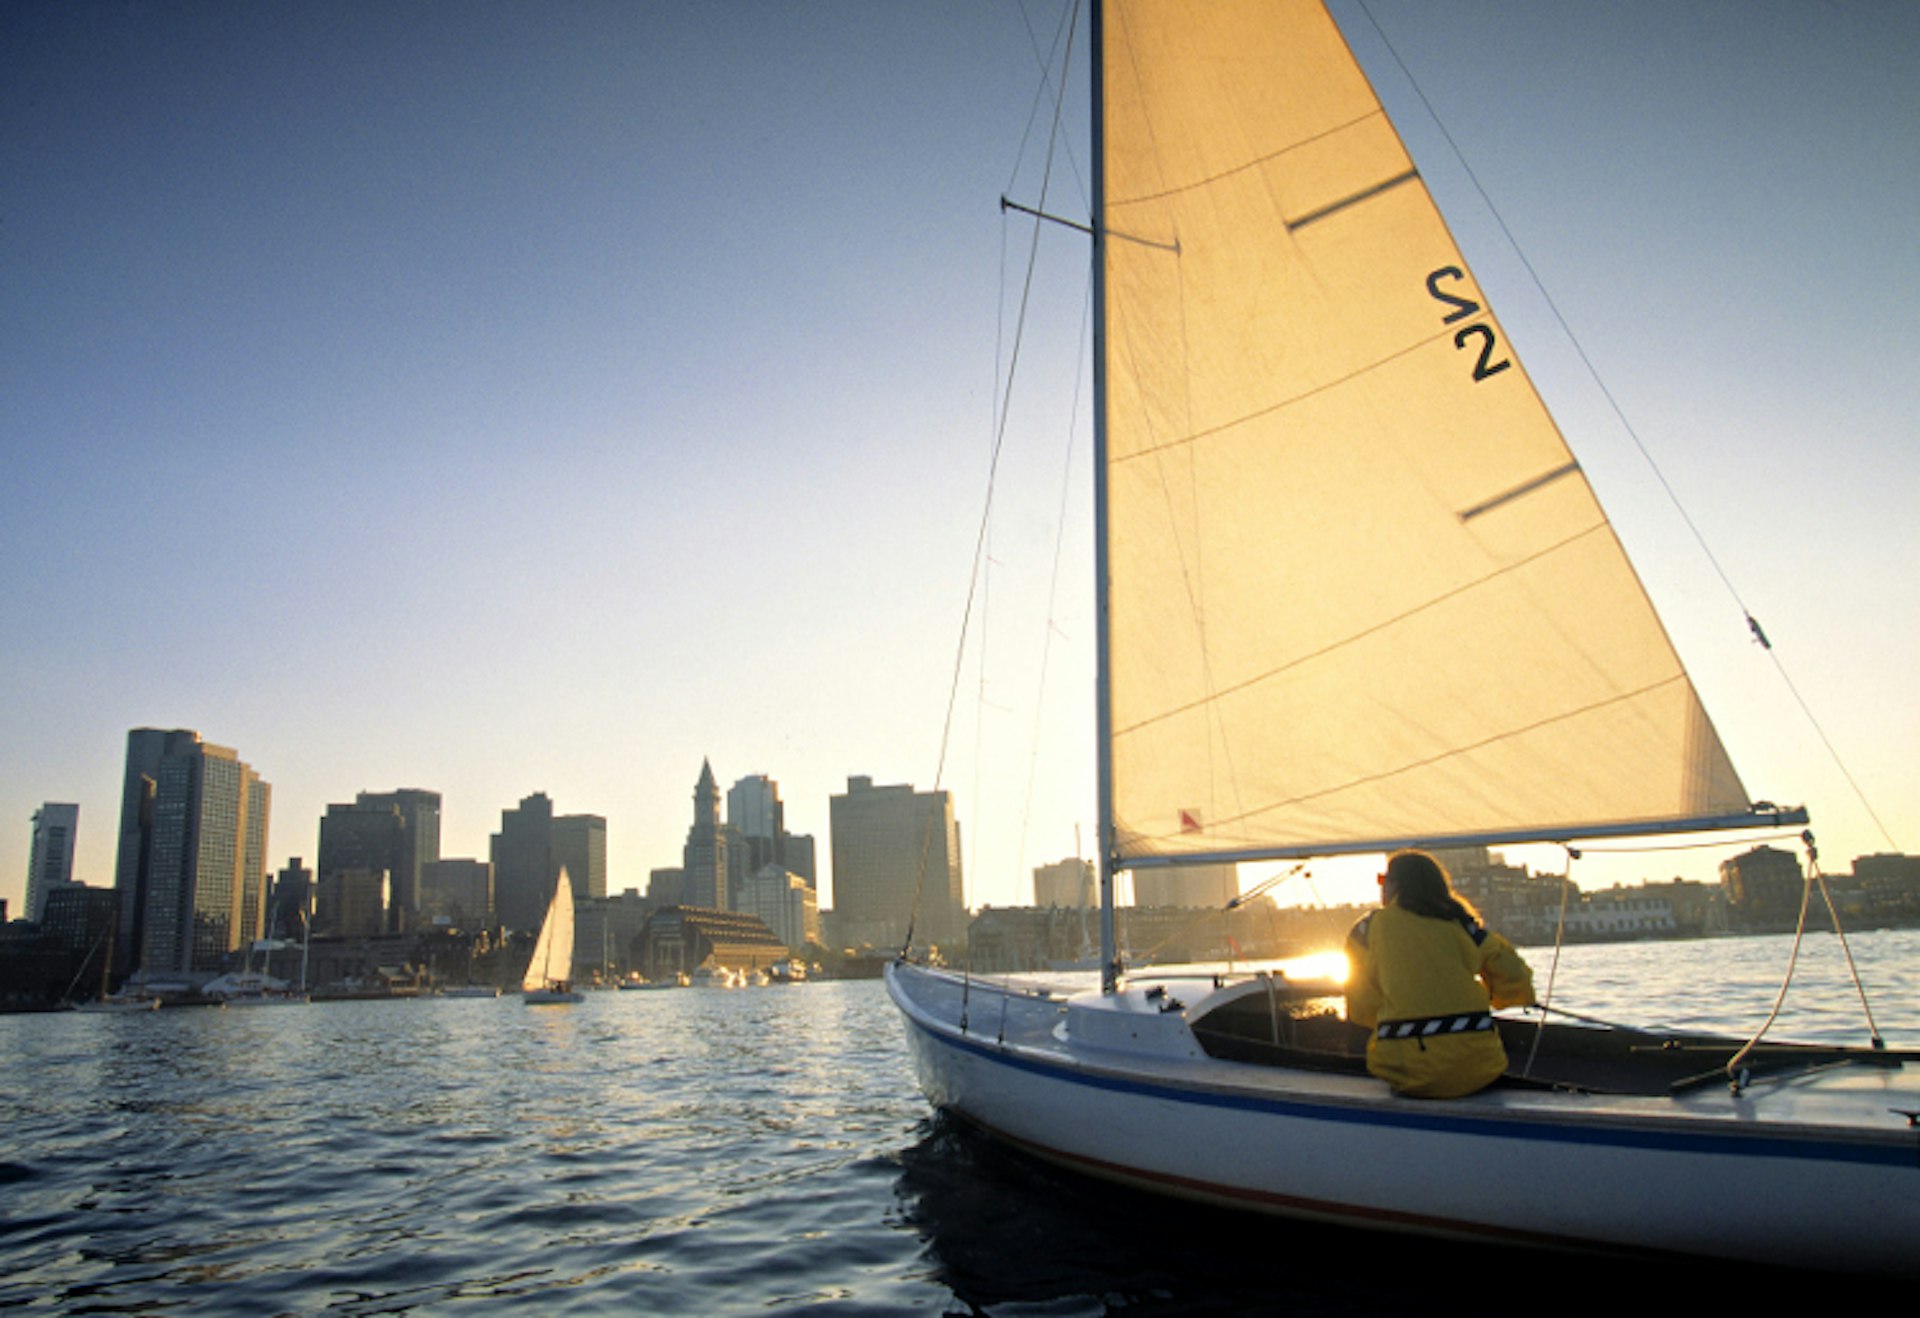 Sailing around the Boston harbor. Image by Walter Bibikow / AWL Images / Getty Images 